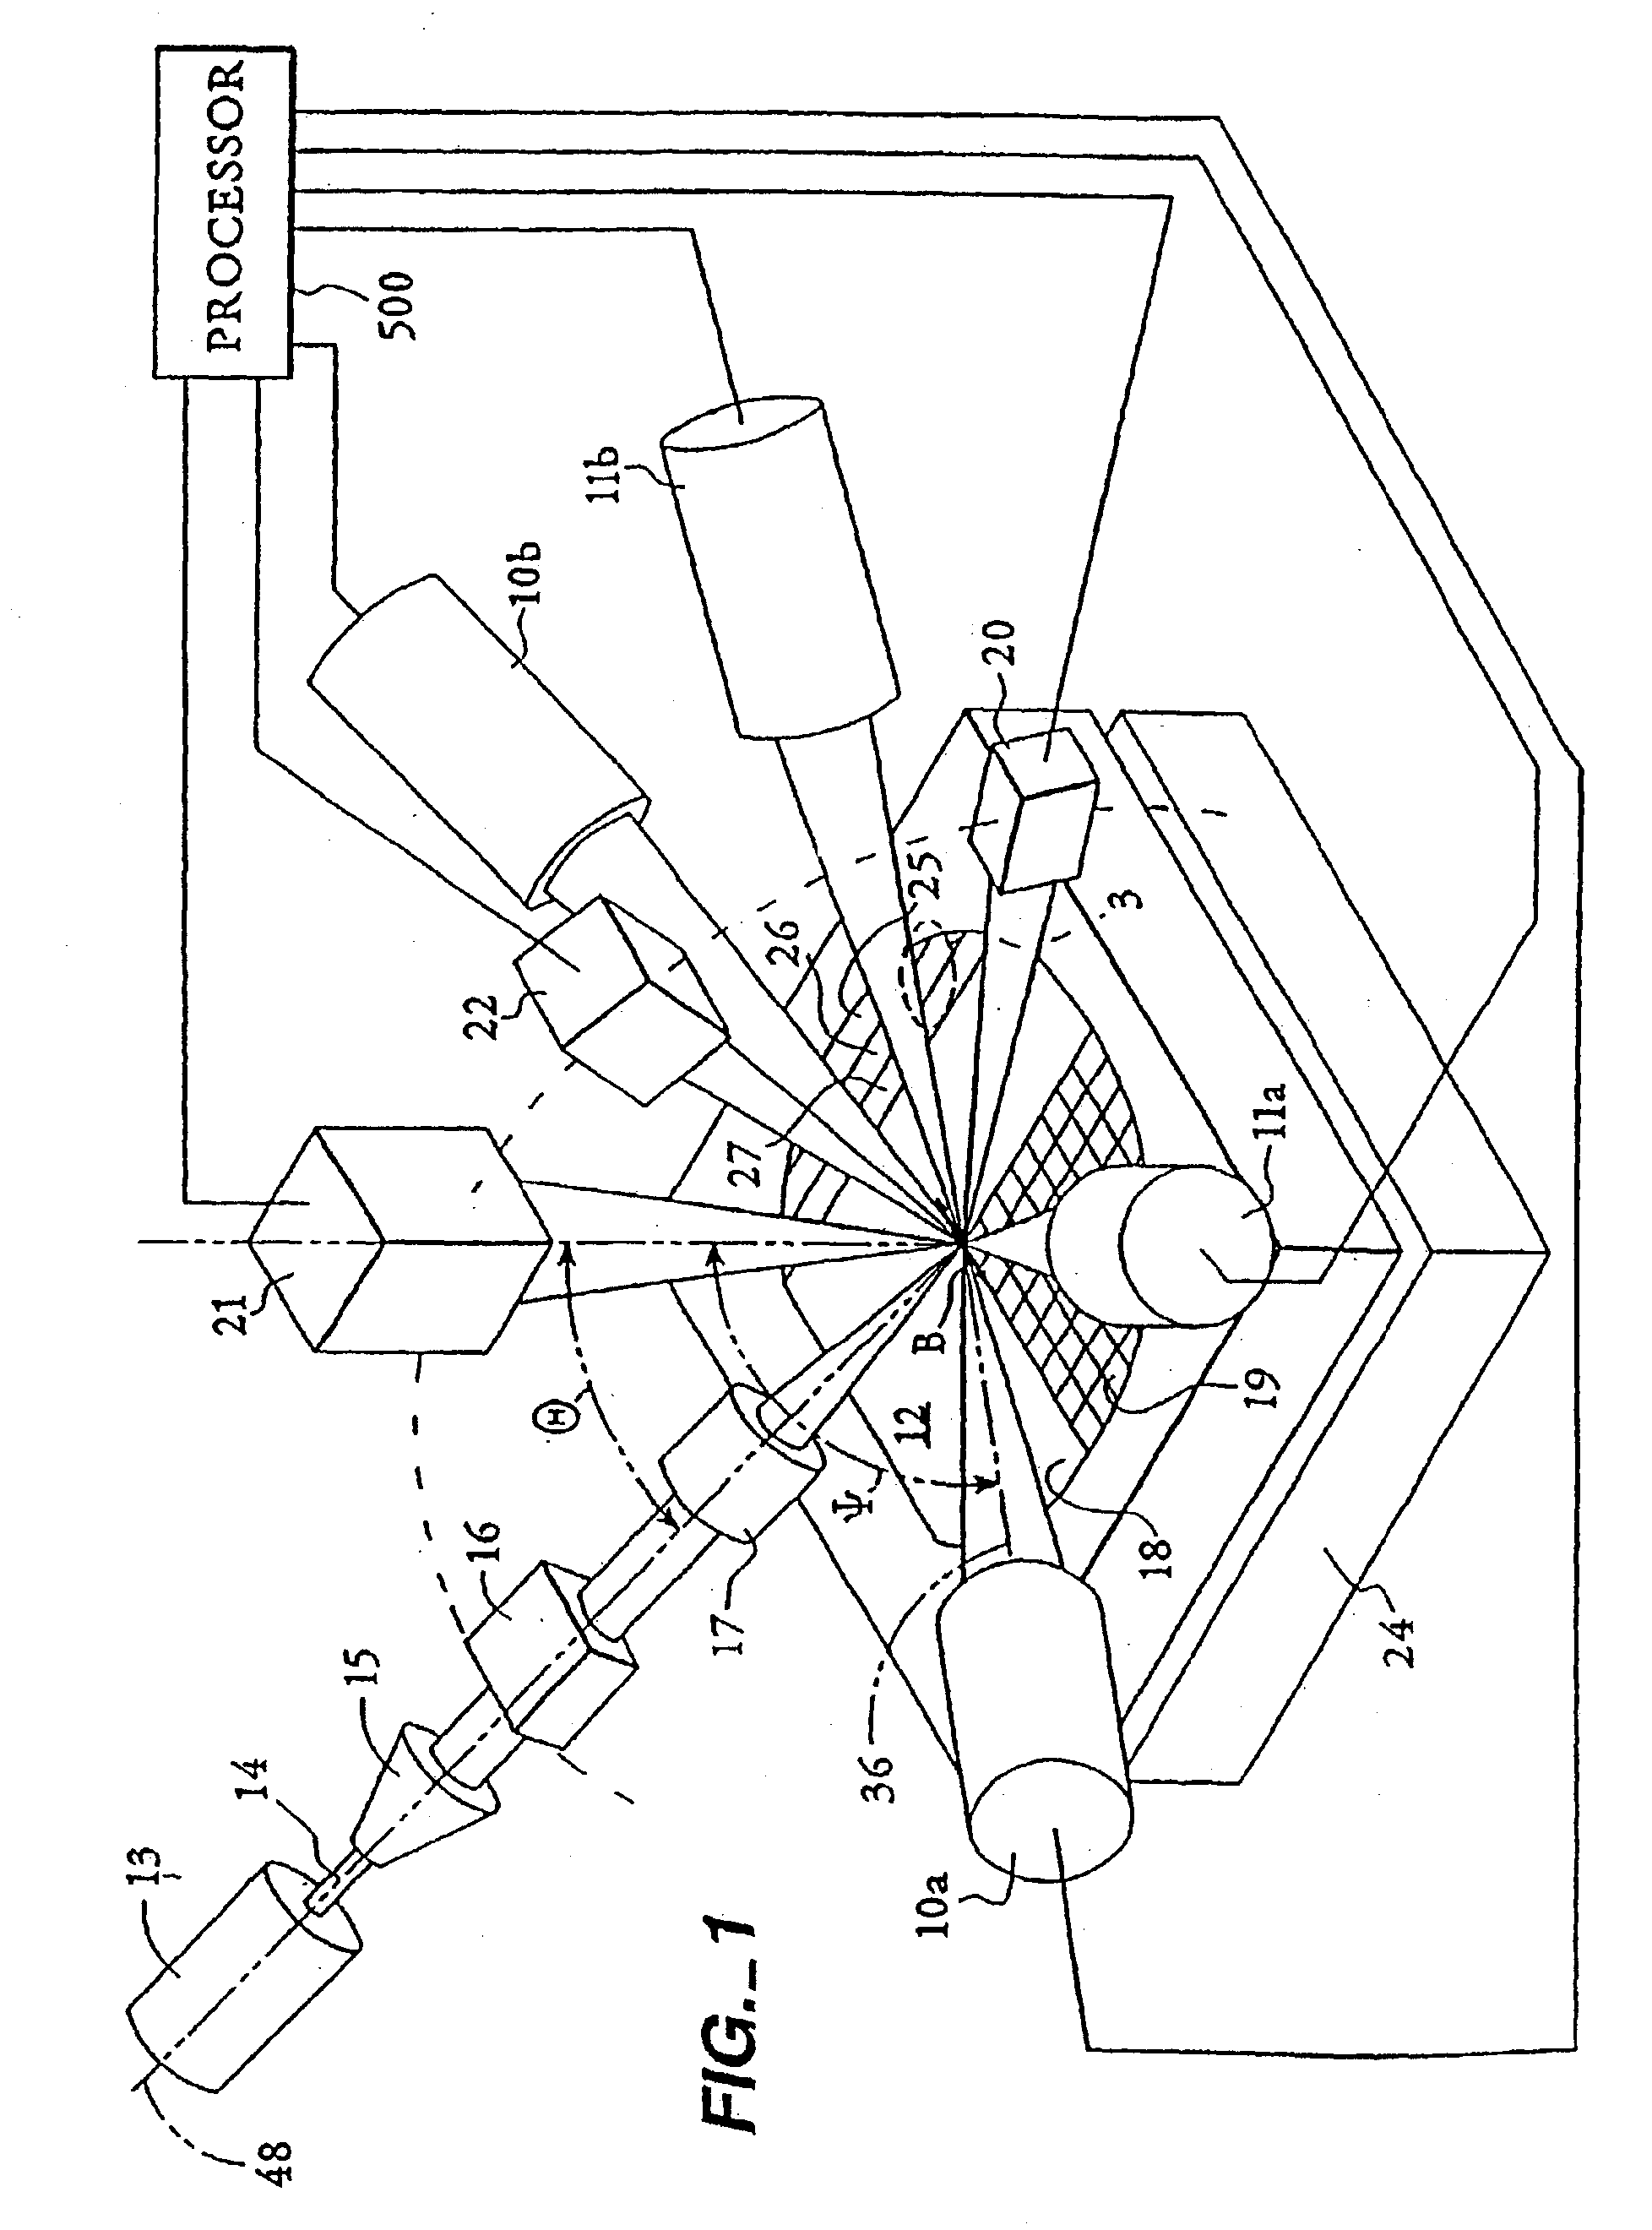 Optical scanning system for surface inspection